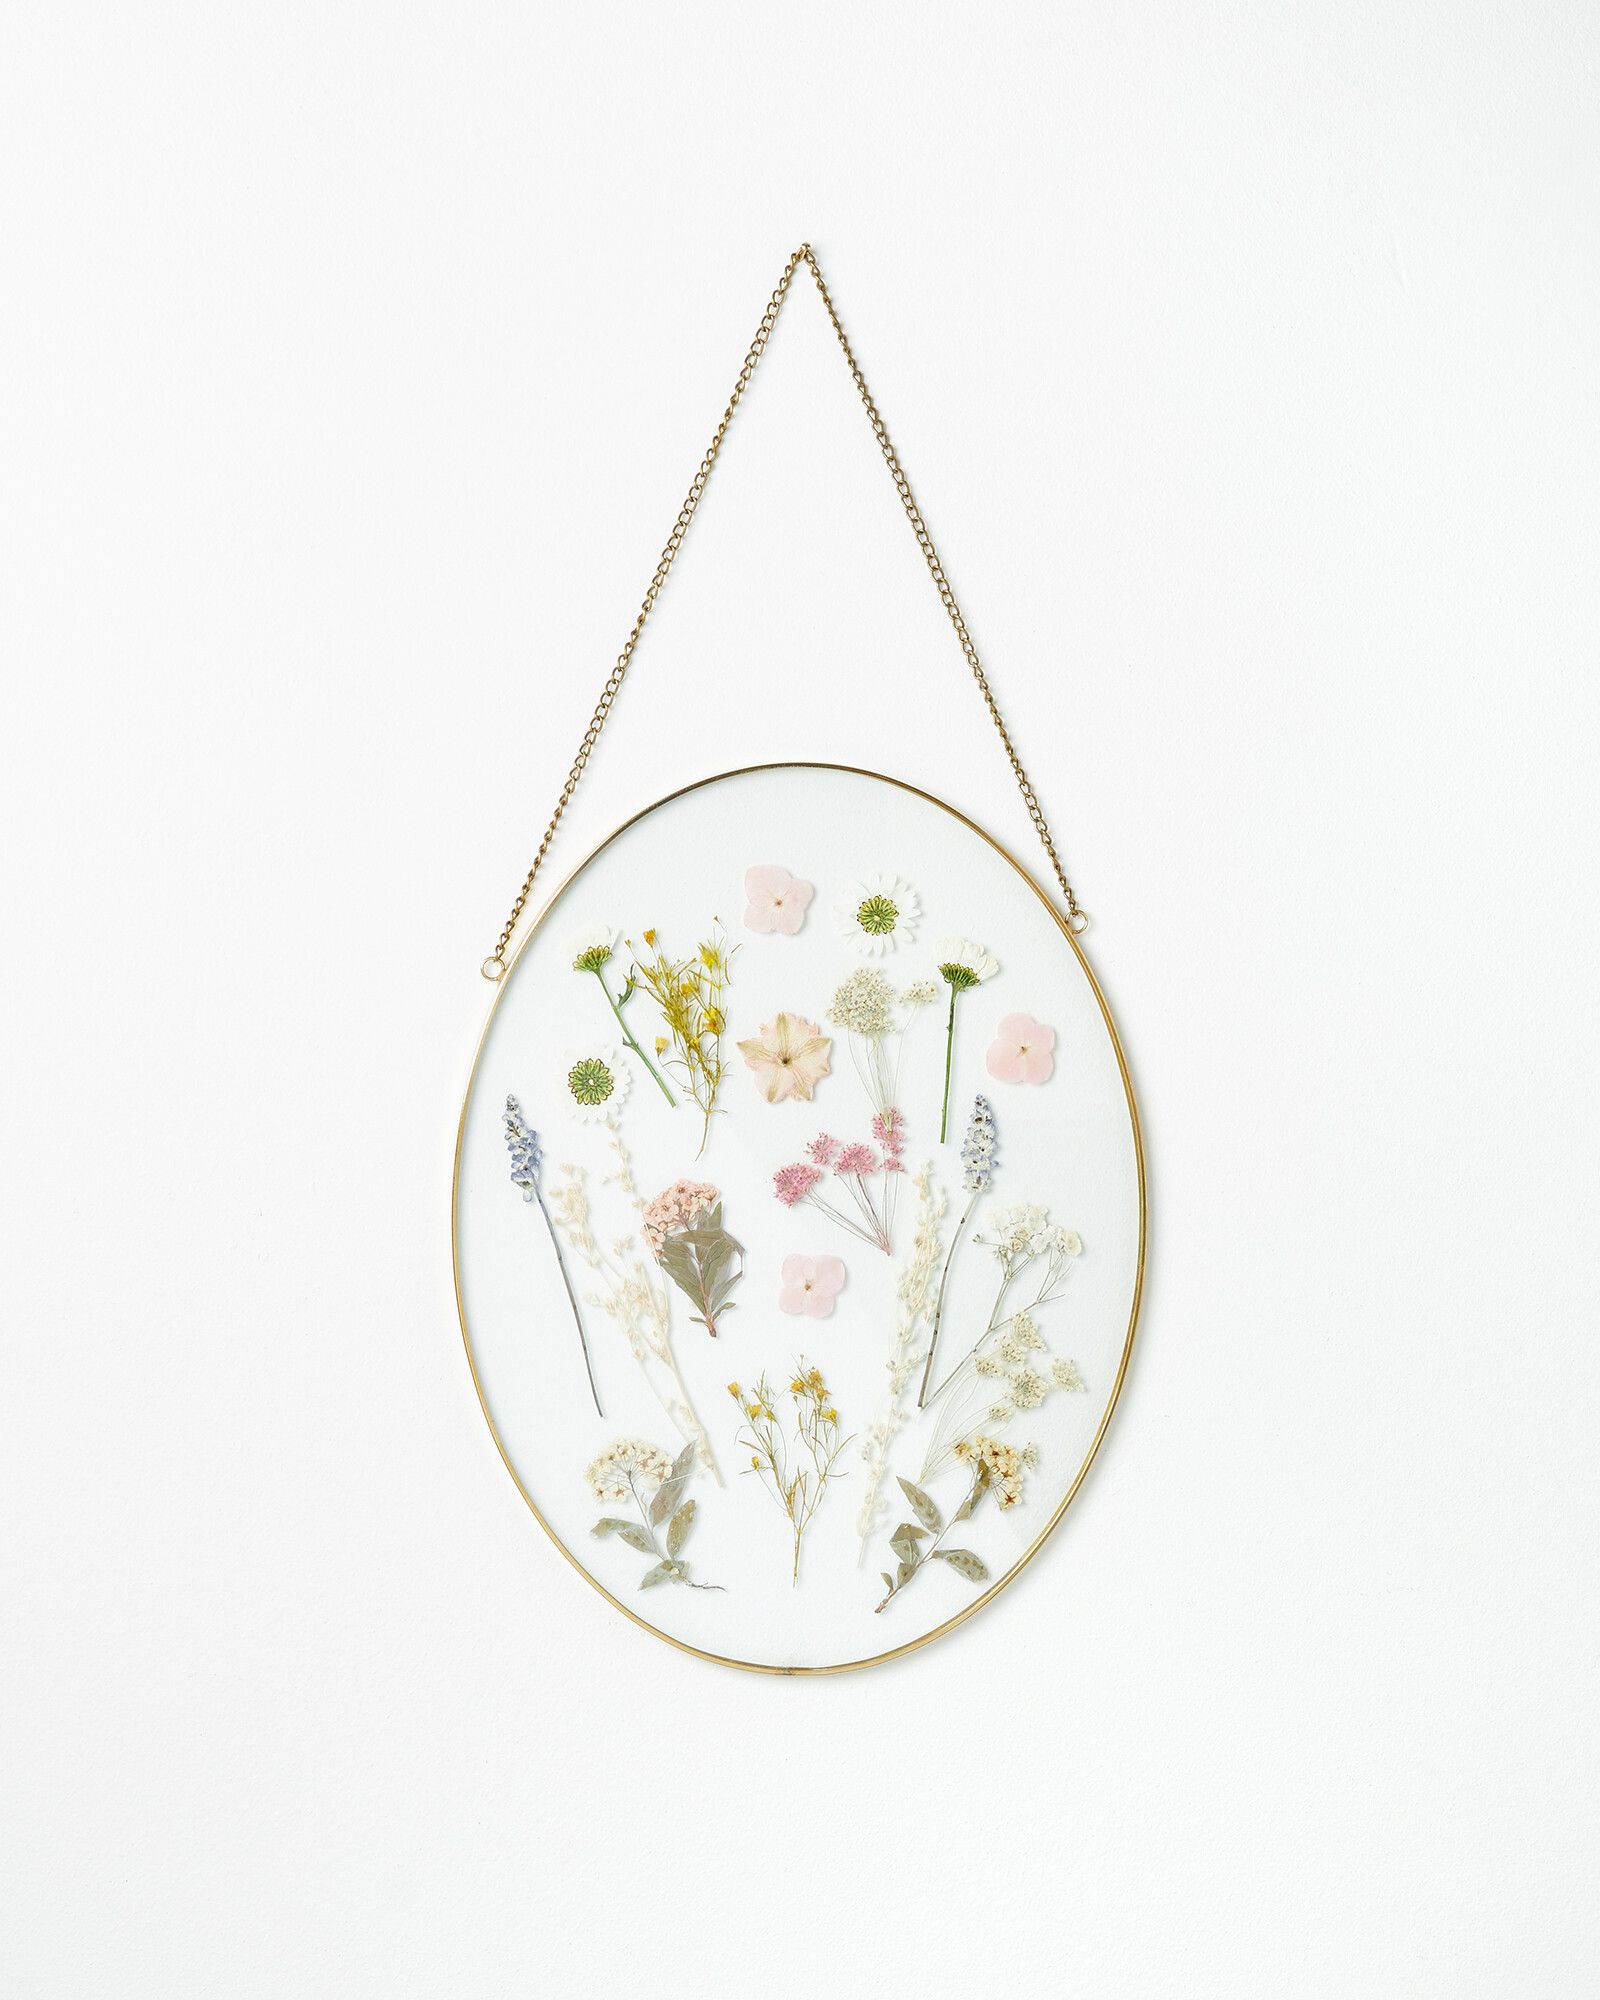 Gold & Glass Oval Dried Flower Wall Hanging | Oliver Bonas